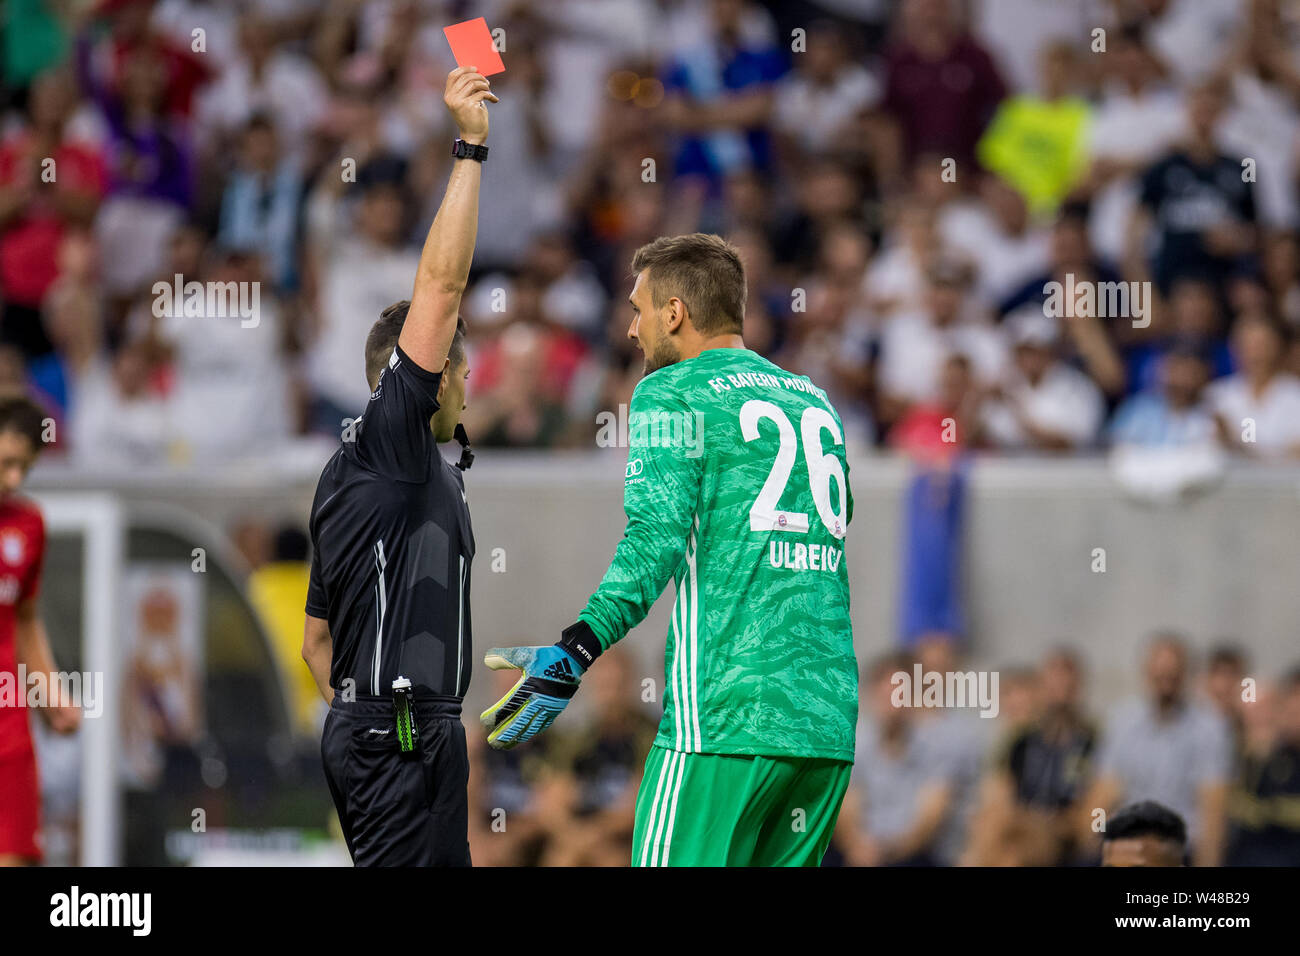 ned midler Politisk Houston, TX, USA. 20th July, 2019. Bayern Munich goalkeeper Sven Ulreich  (26) receives a red card from the referee during the second half of an  International Champions Cup soccer match between FC